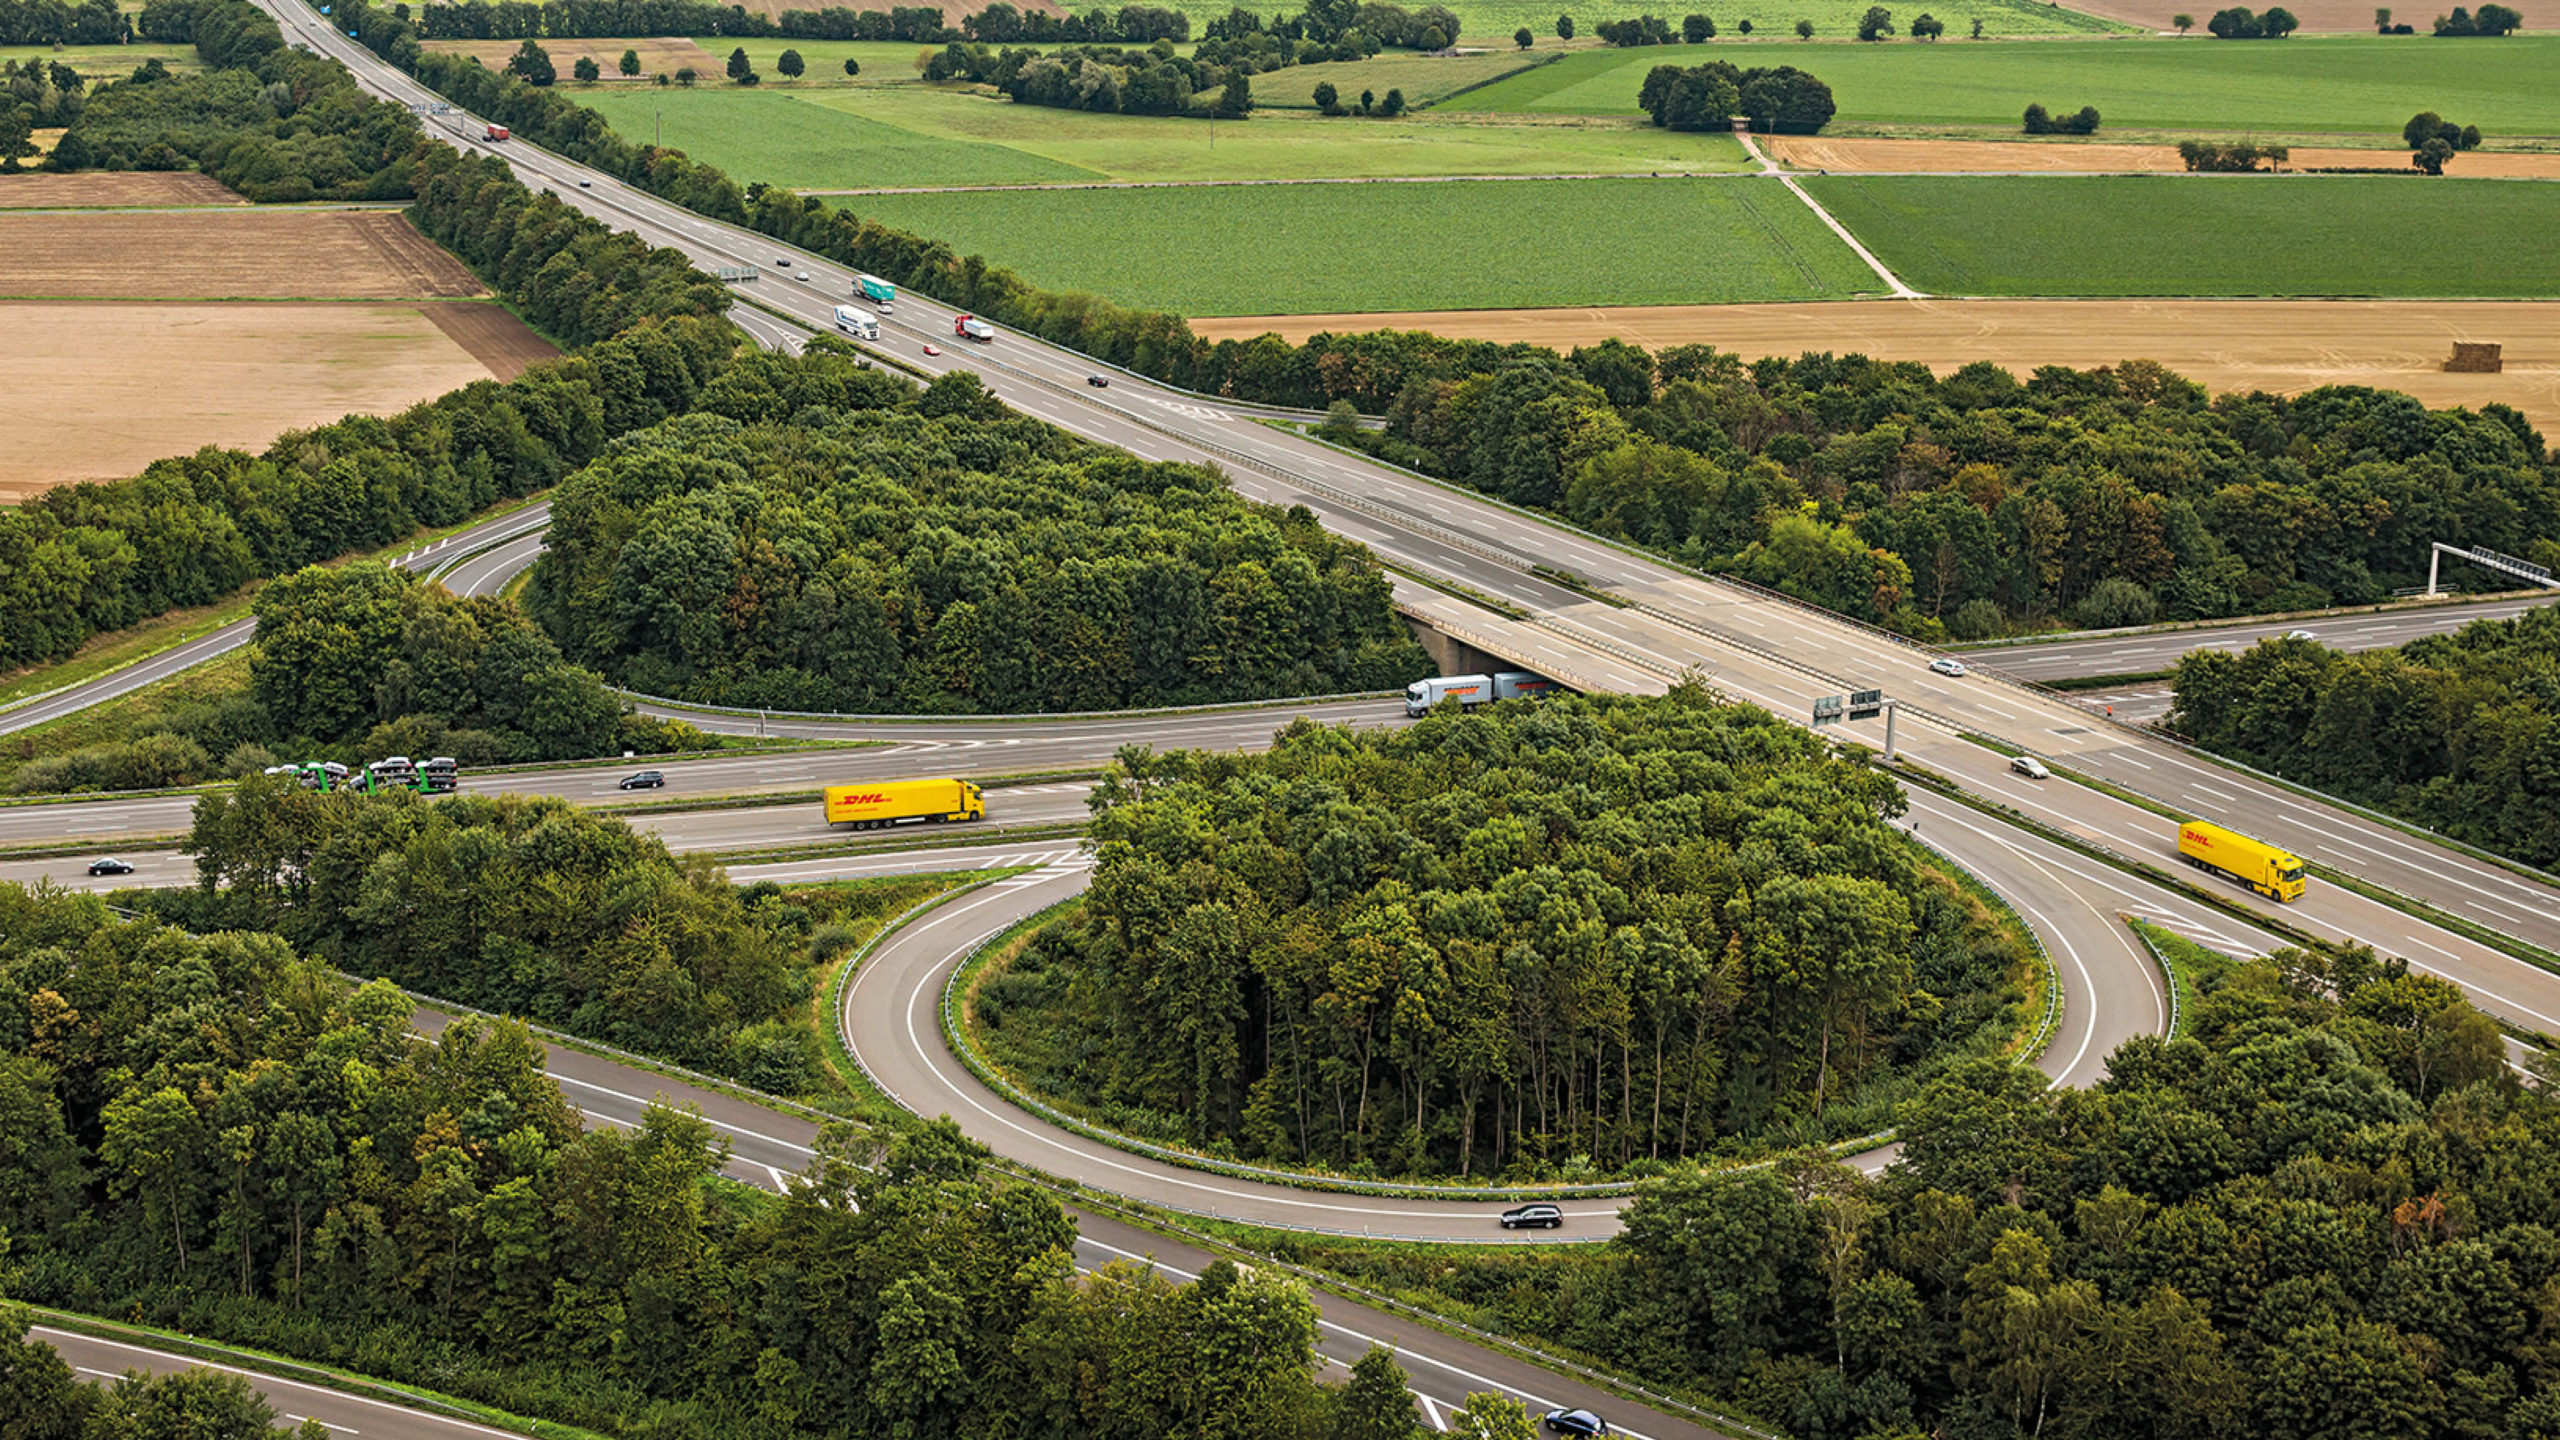 Investing in Quality: DHL Freight Germany Is Positioning Itself for the Future